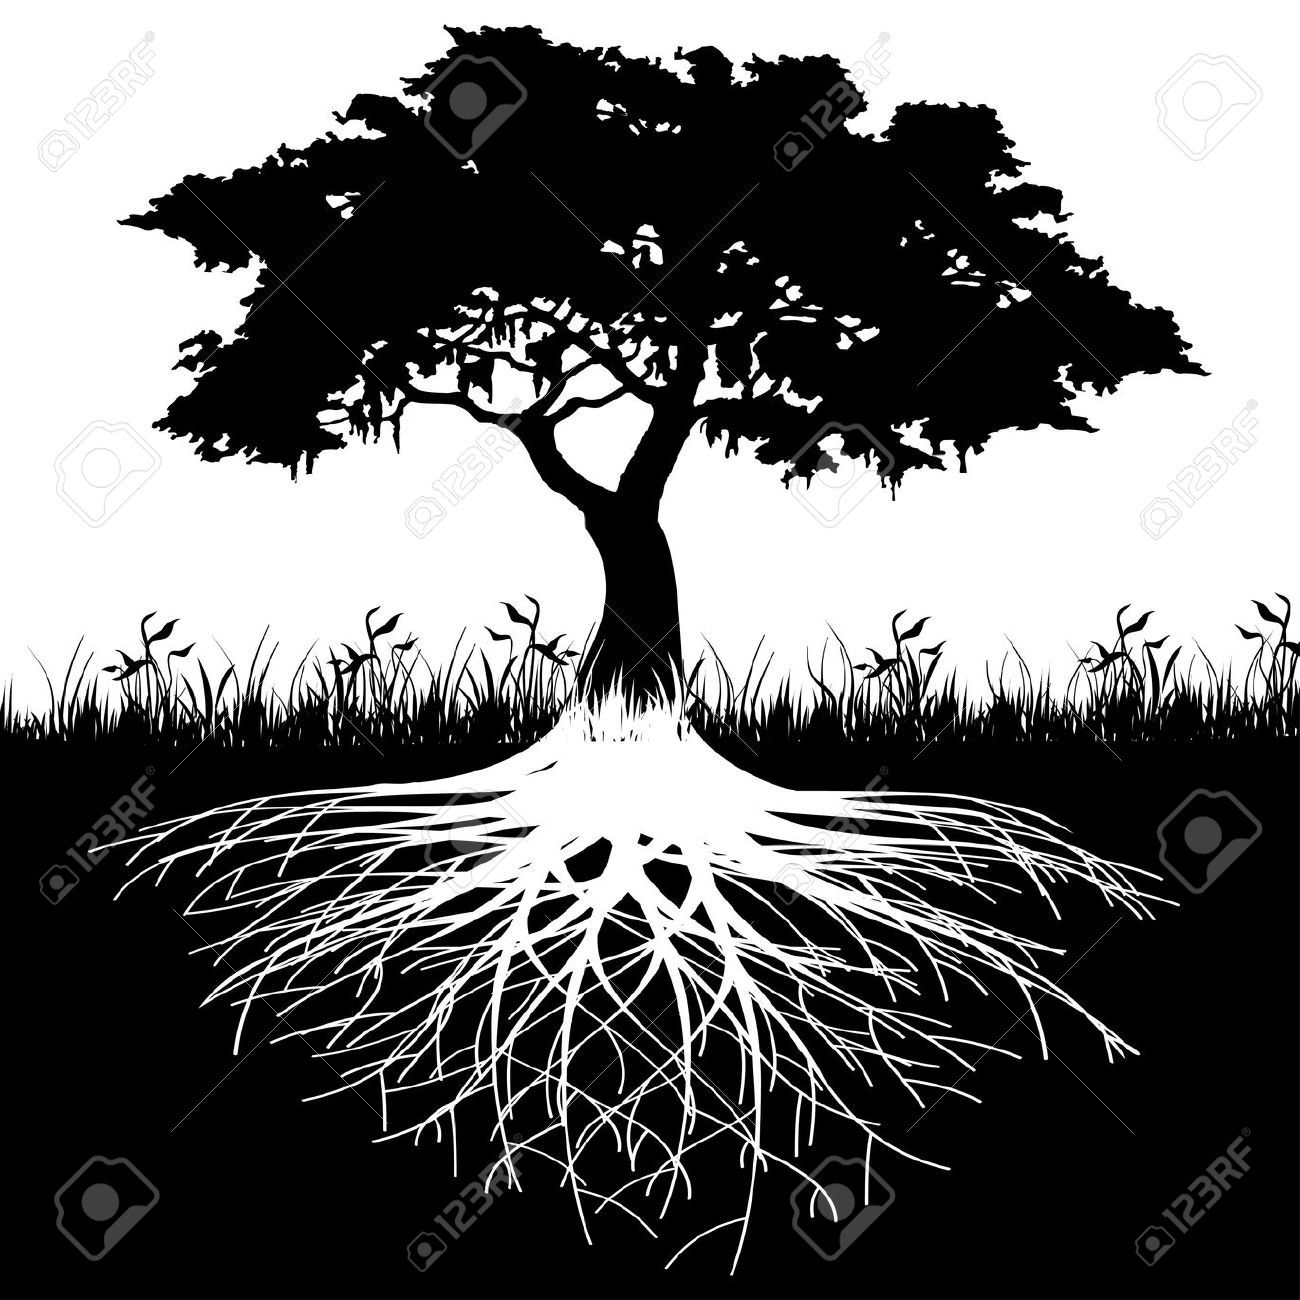 roots clipart simple